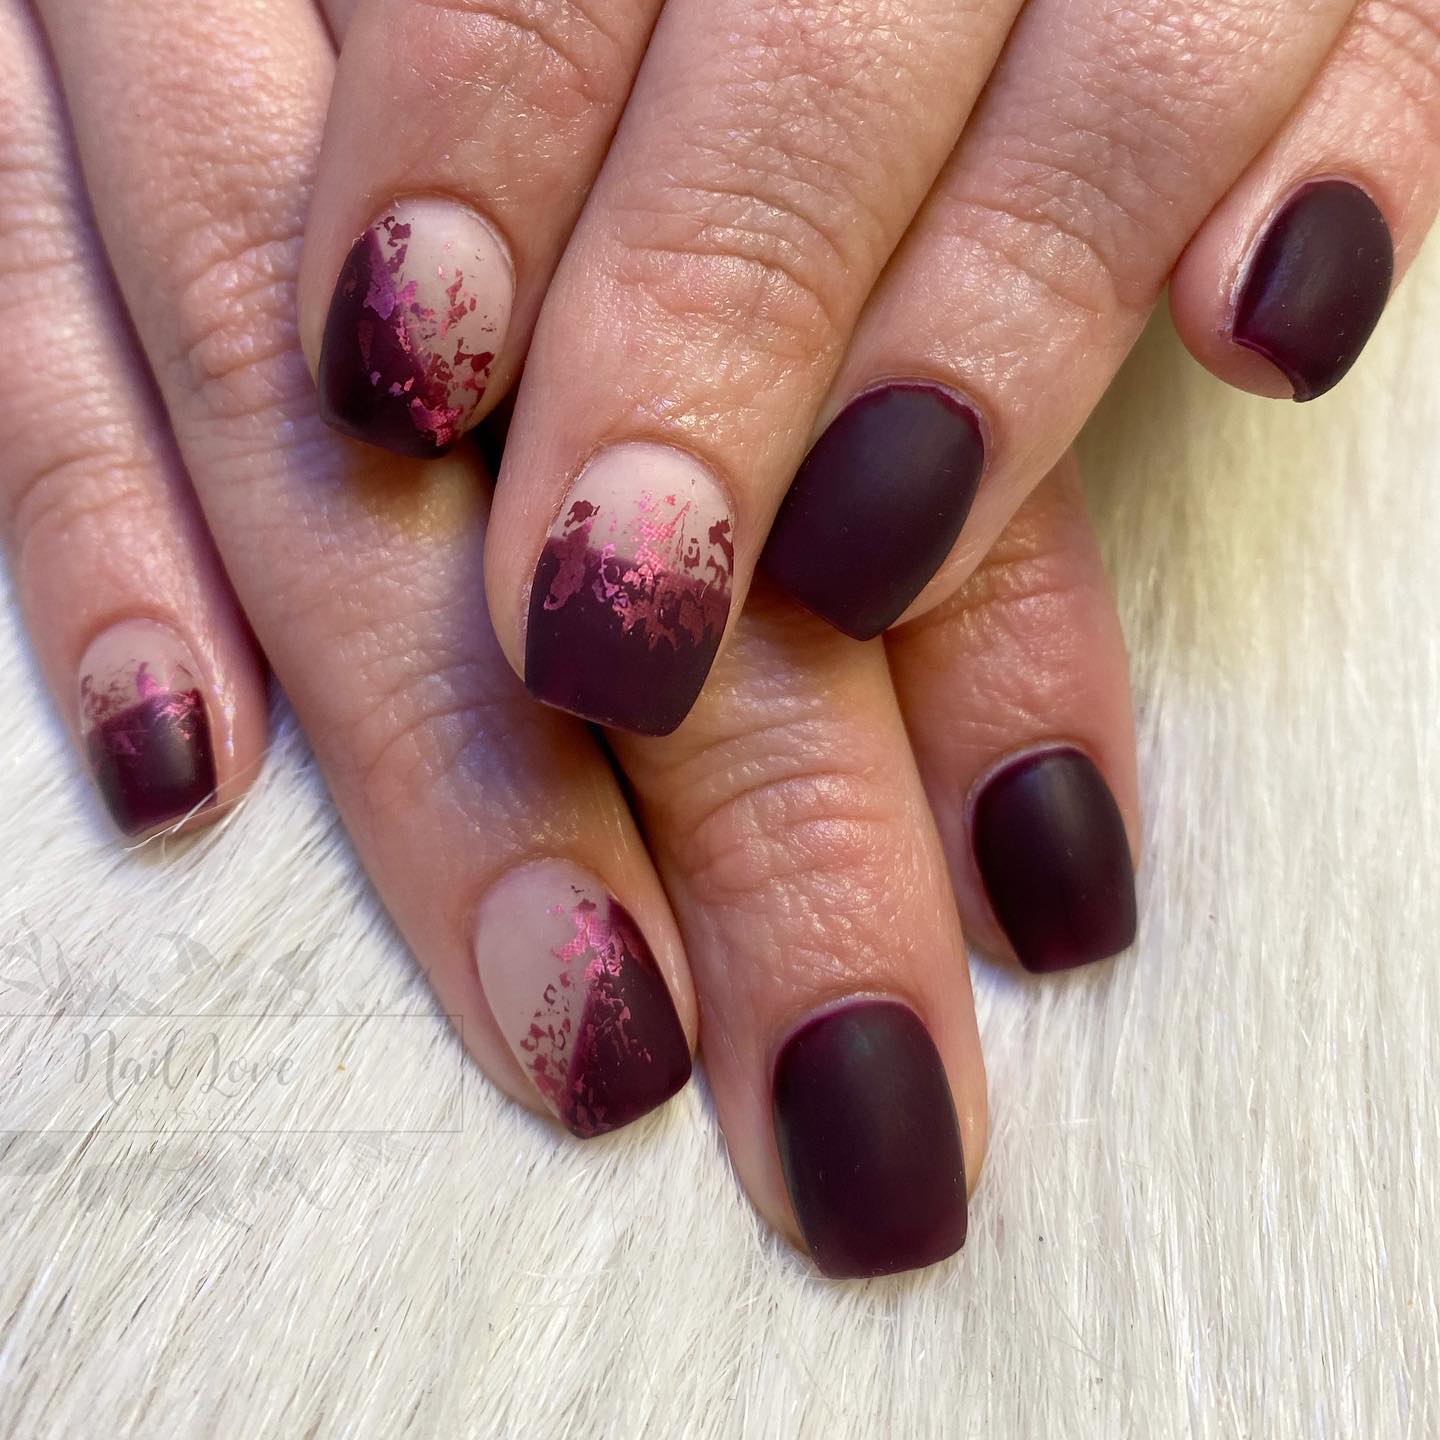 The 15 Best Burgundy Nail Ideas to Try This Fall | Maroon nail designs, Maroon  nails, Burgundy nail designs